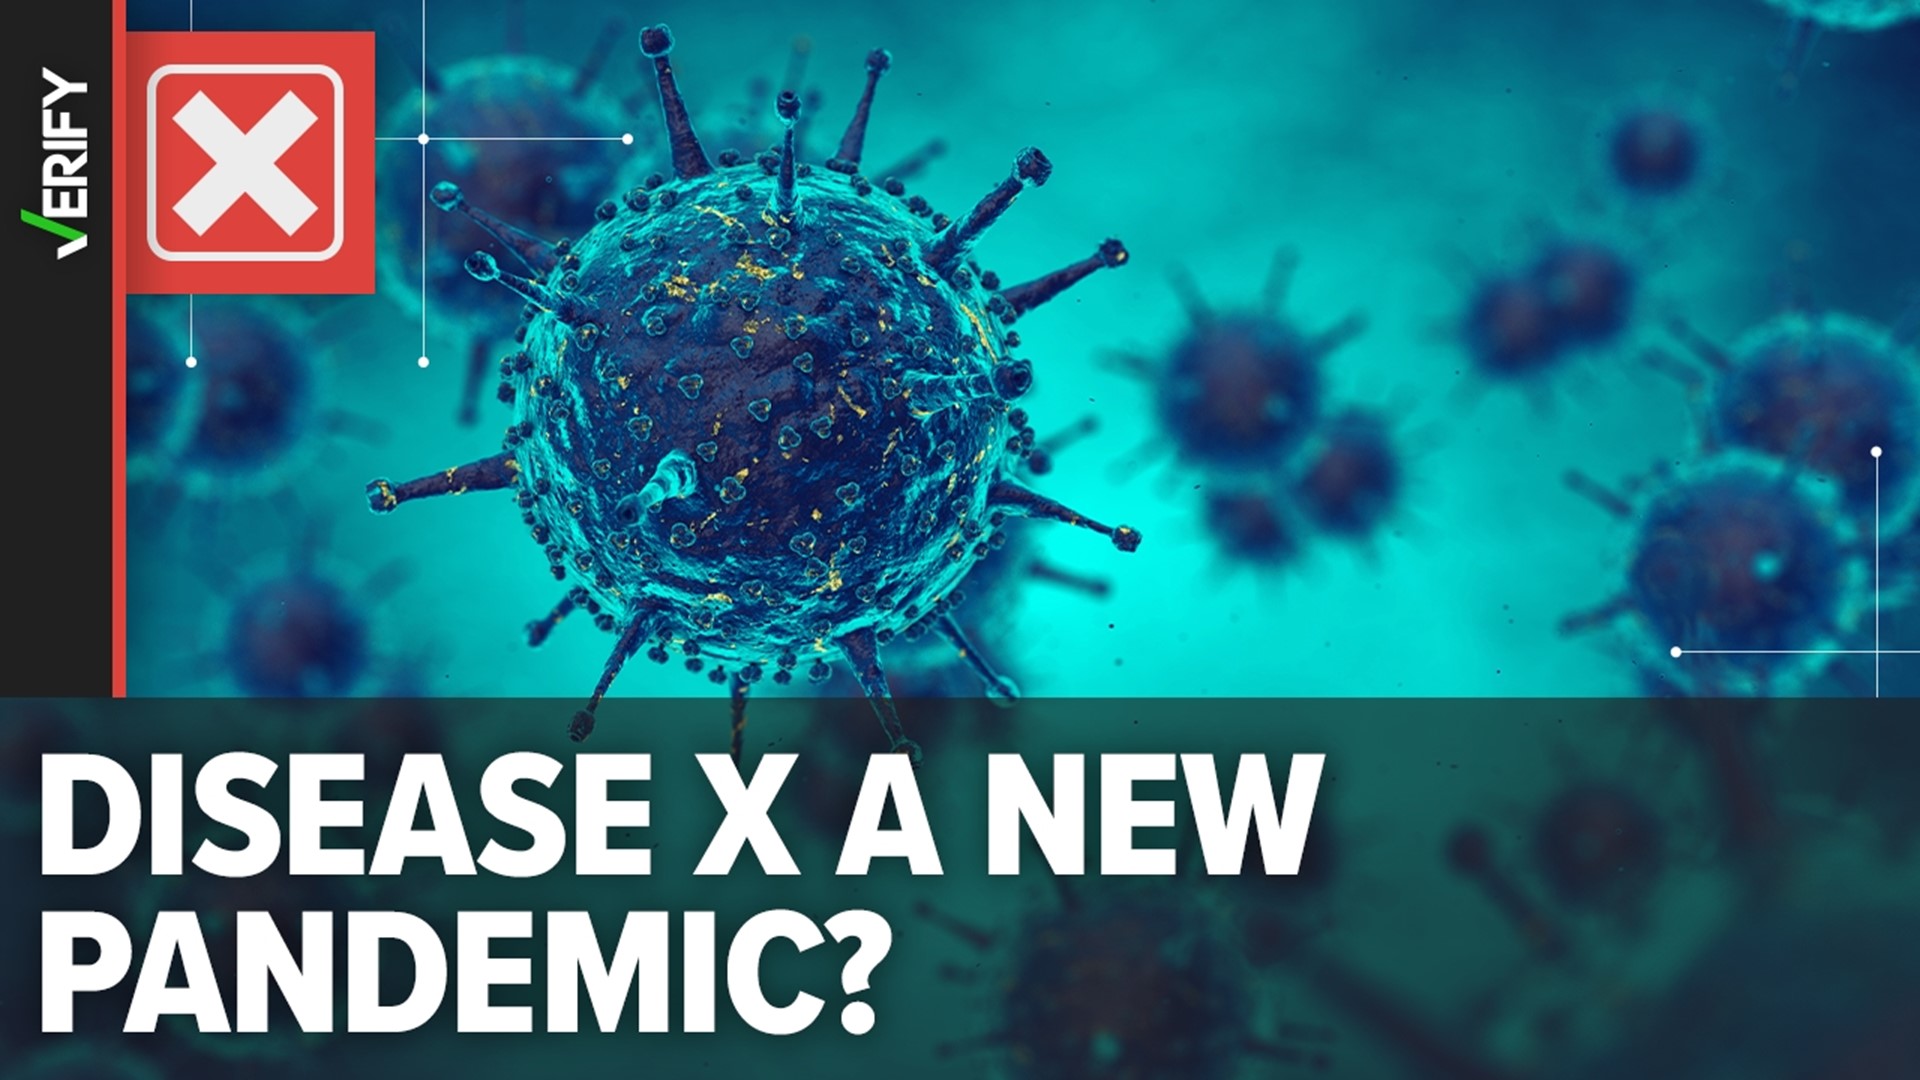 Disease X is a placeholder name for a hypothetical disease that could emerge in the future. It isn’t currently spreading and causing symptoms.